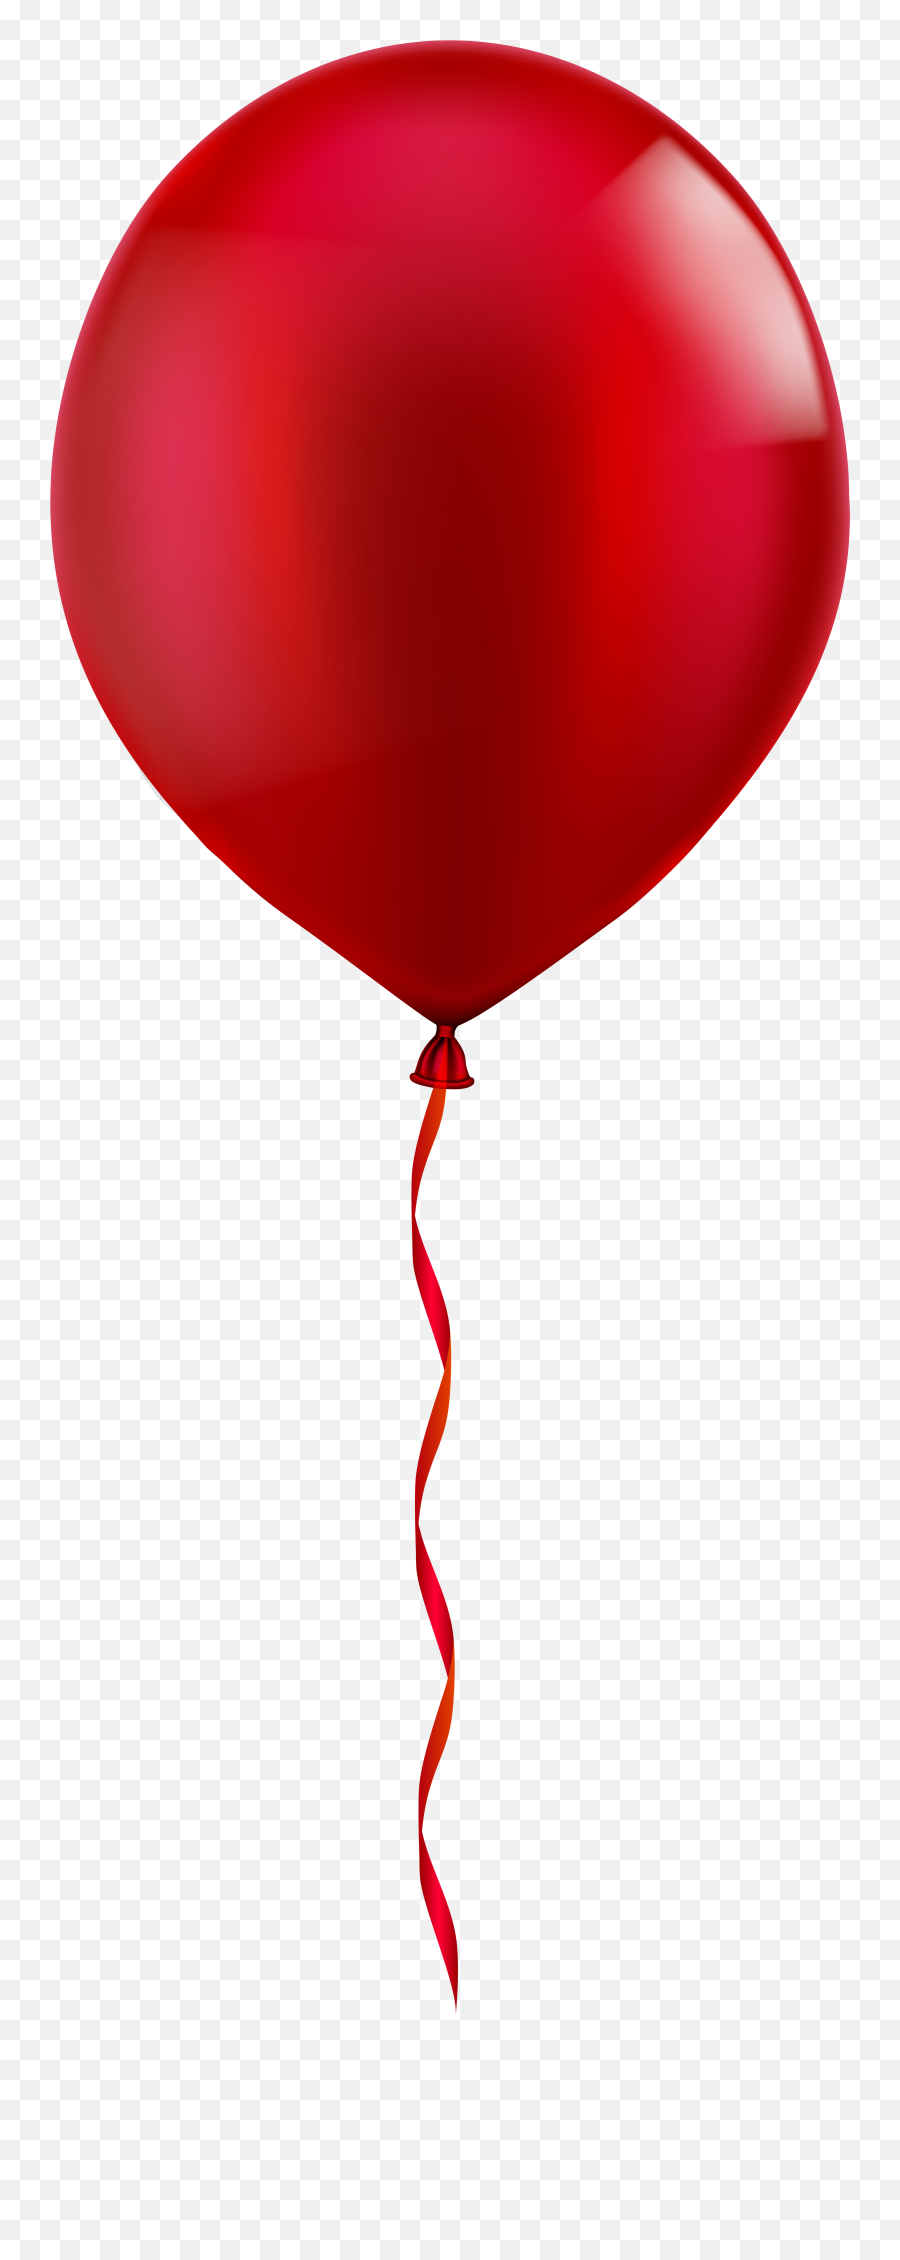 Portable Network Graphics - Red Balloon Clipart Png Emoji,Red Balloon Emoji